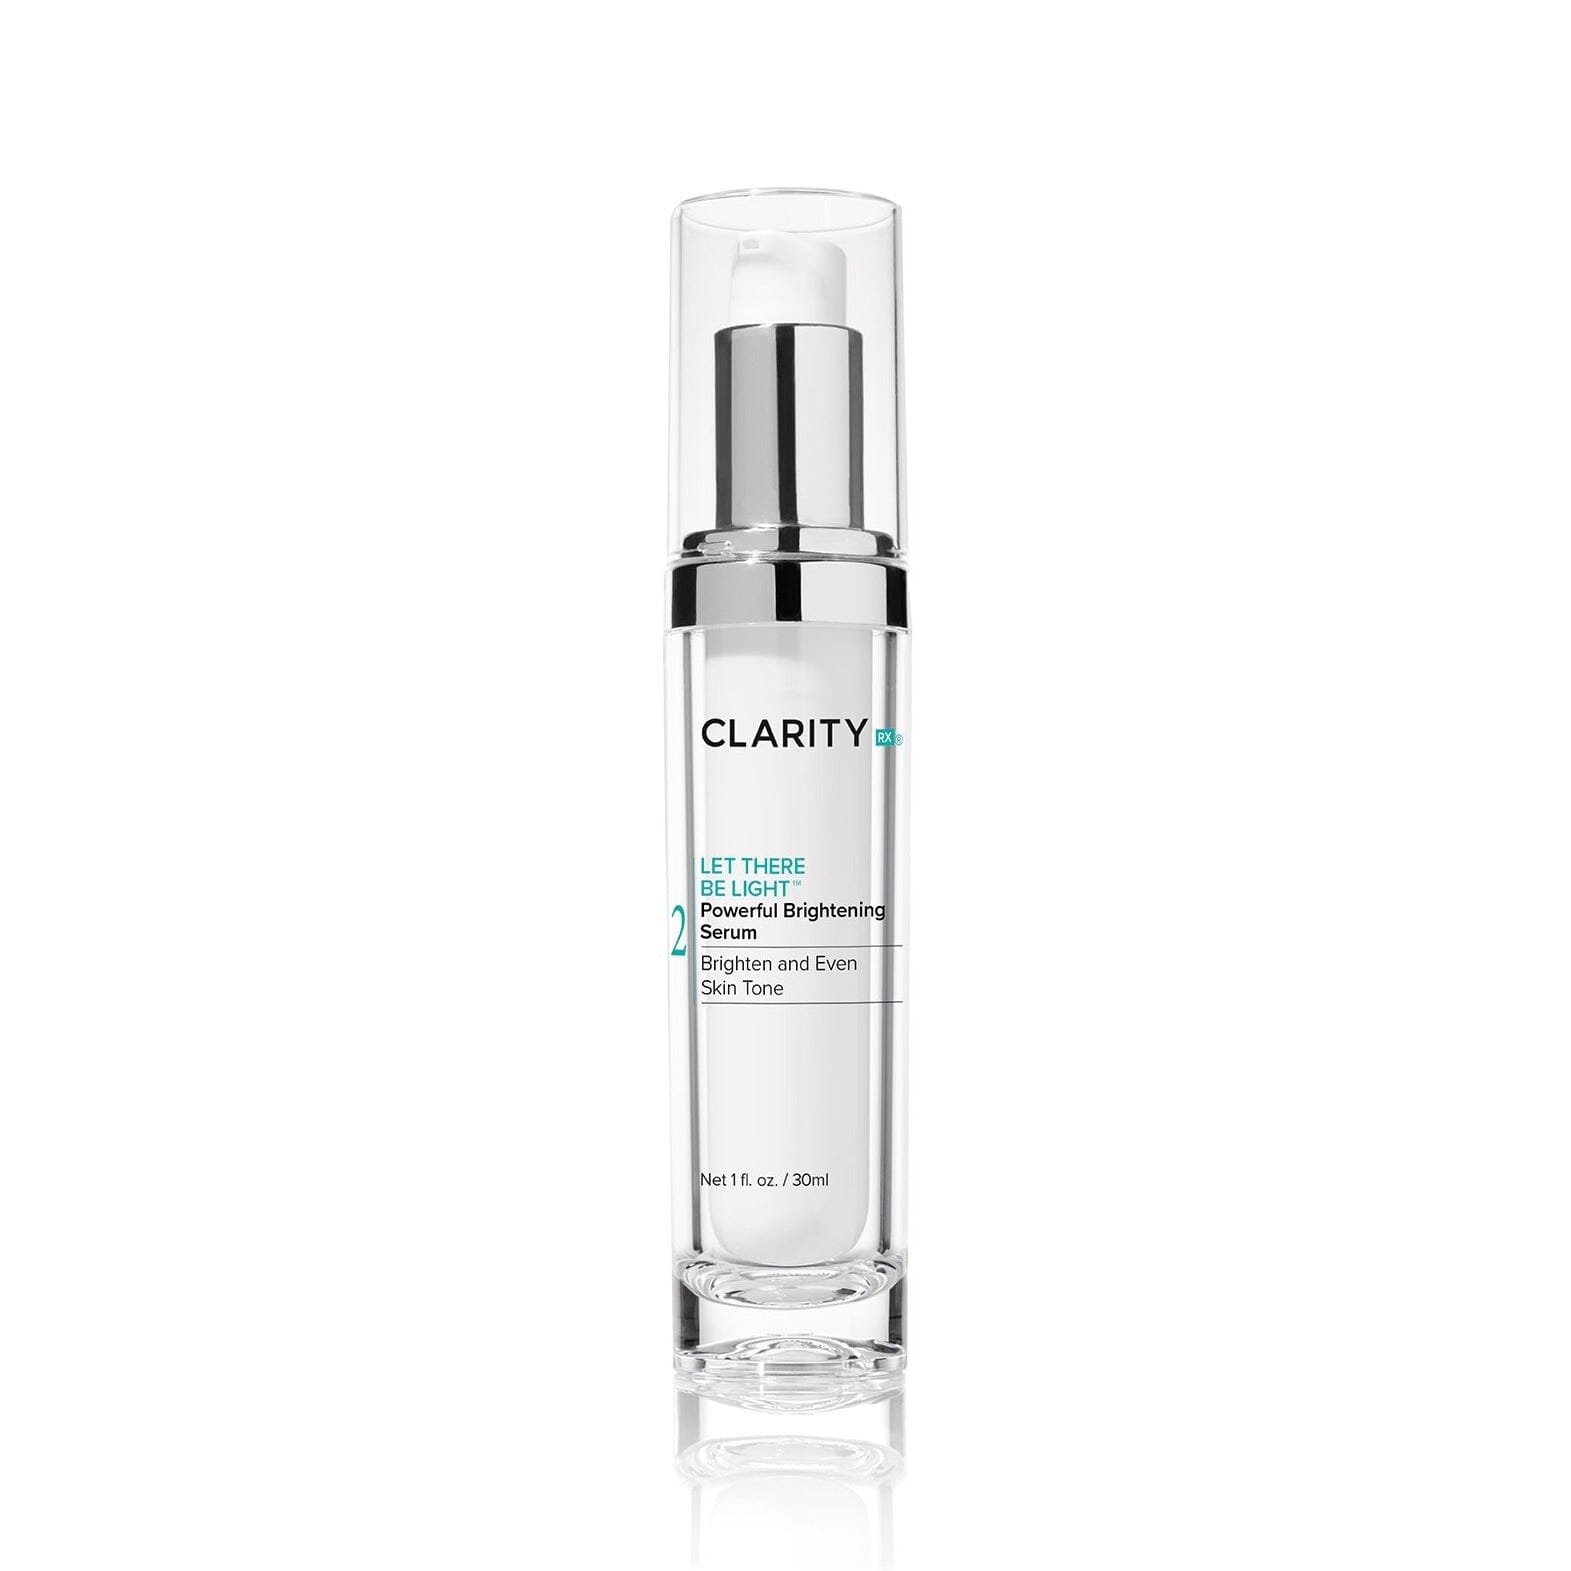 ClarityRx Let There Be Light Powerful Lightening Serum ClarityRx 1.0 fl. oz. Shop at Exclusive Beauty Club